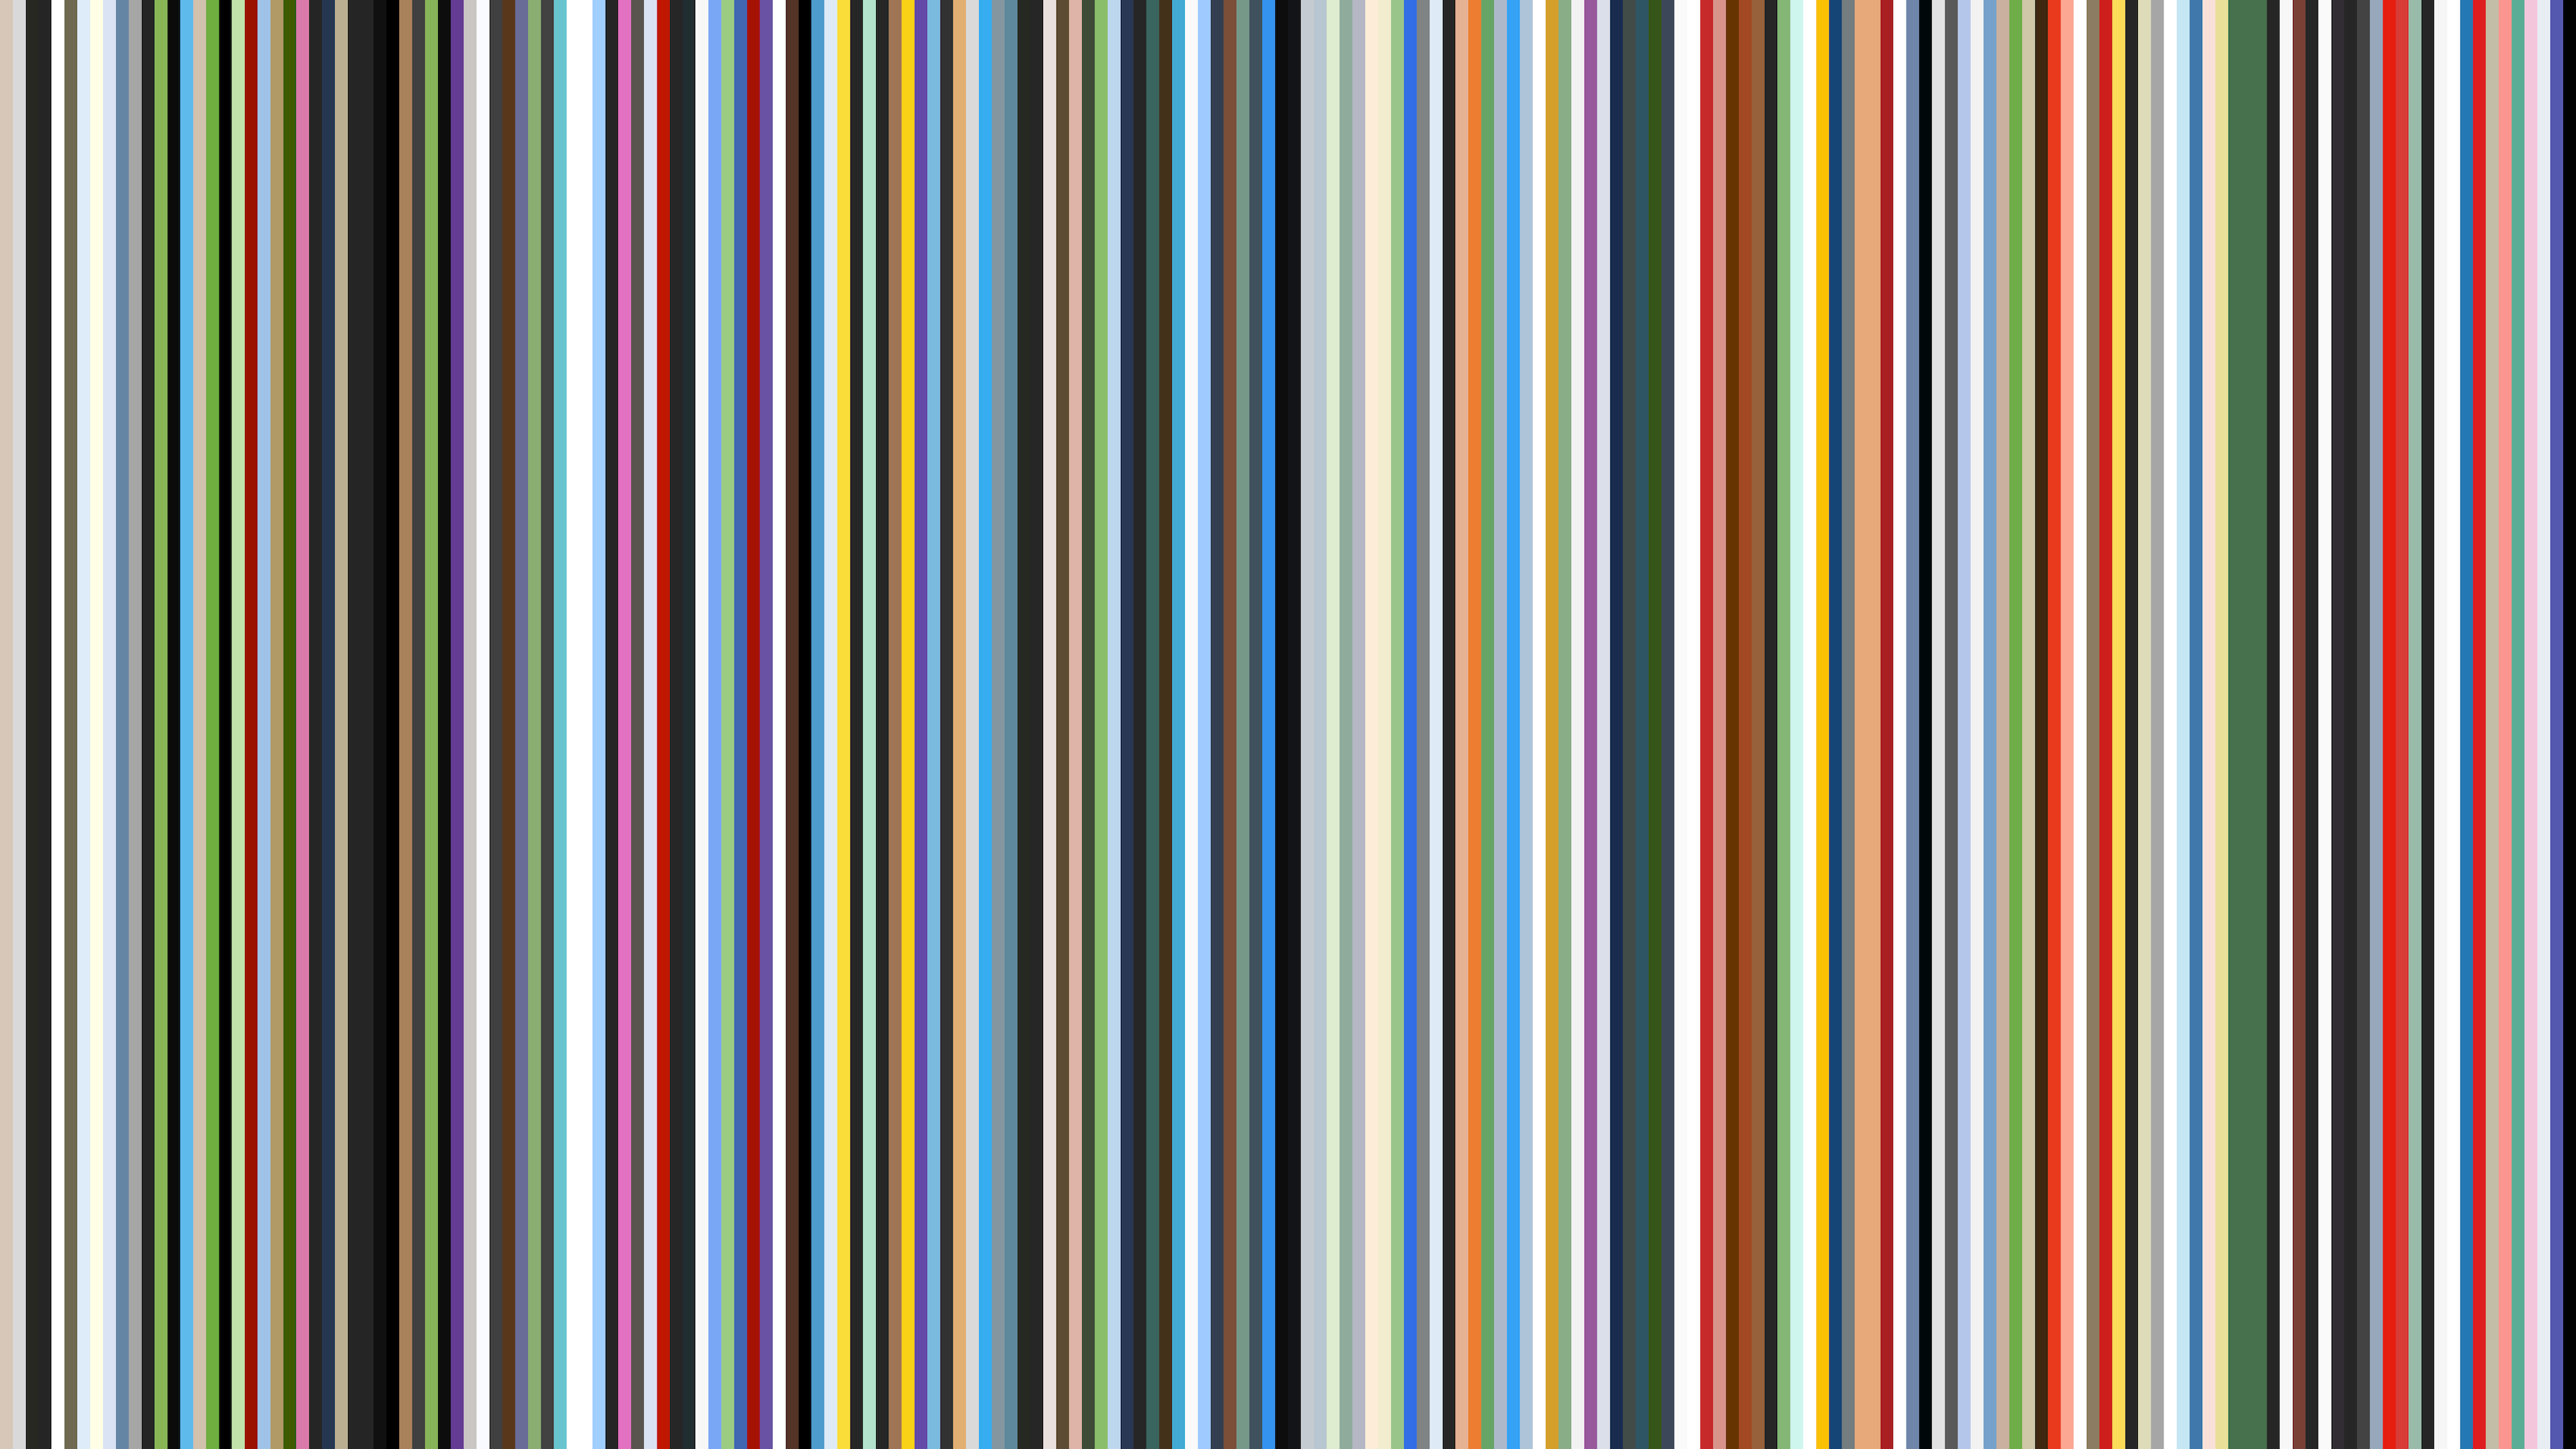 200 horizontally stacked coloured bars, one for each illustration